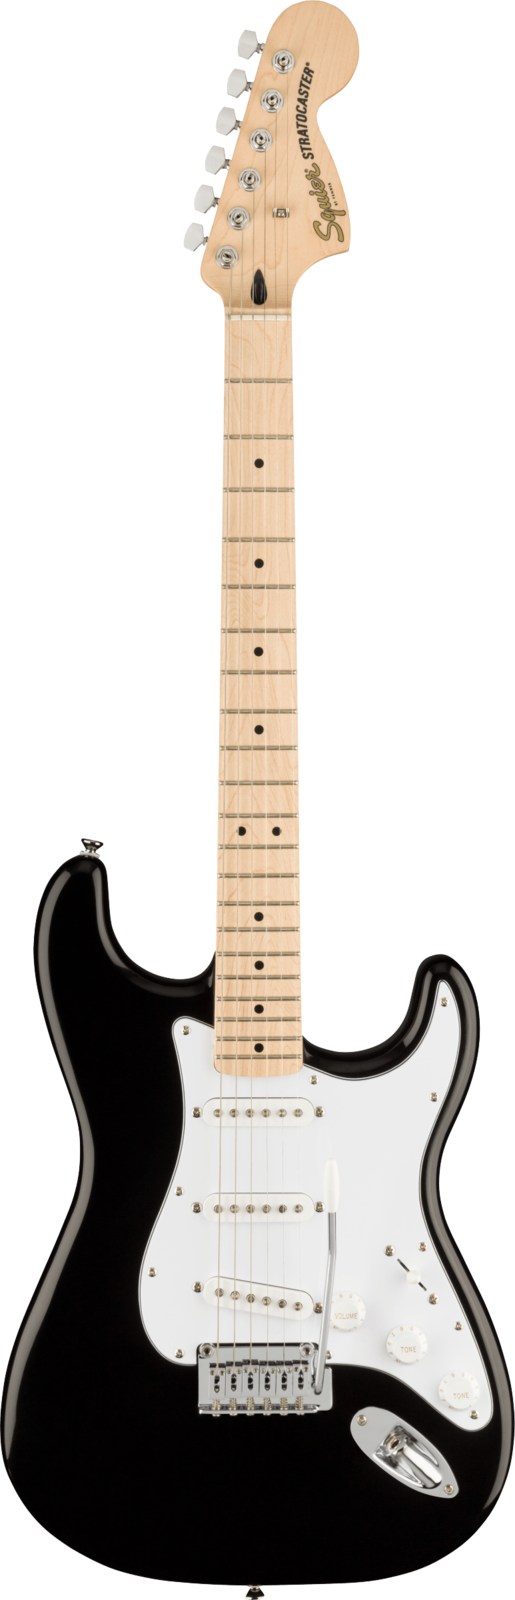 Squier Affinity Stratocaster Mustang Pack Black